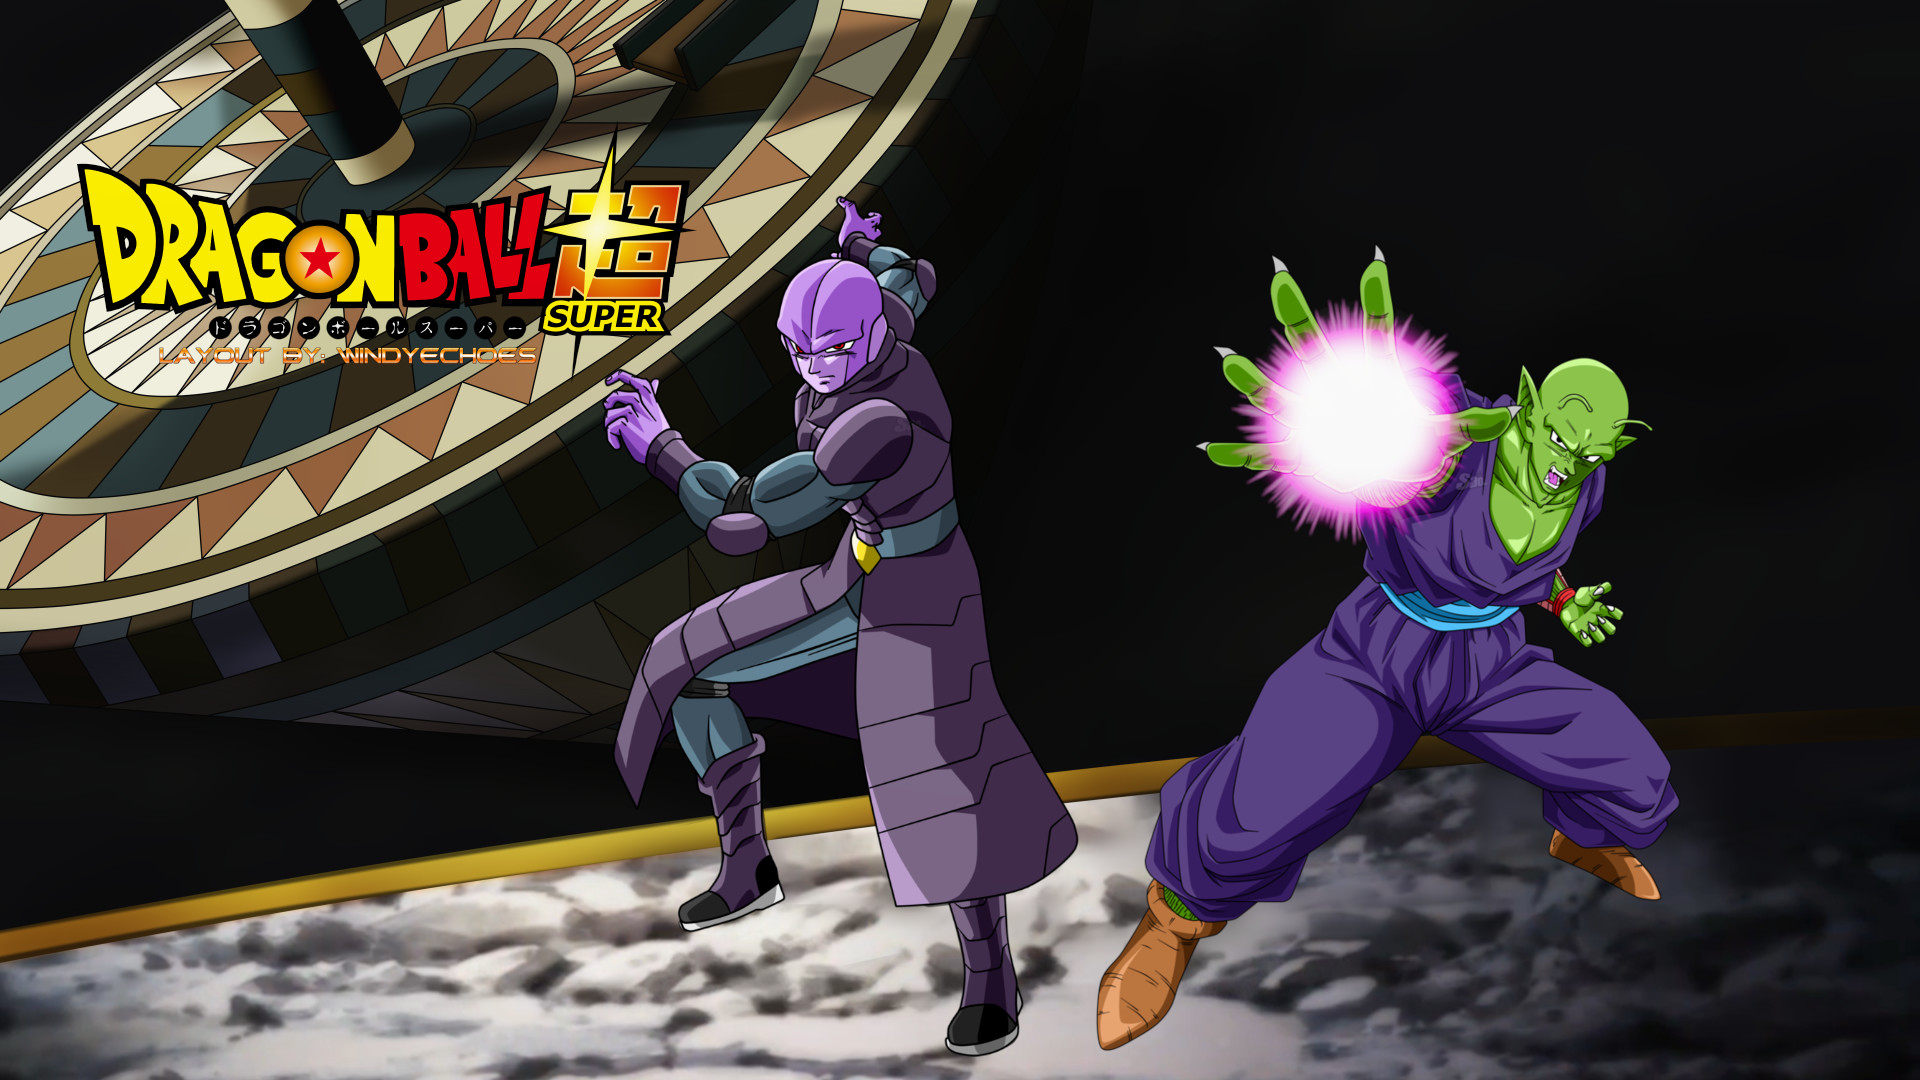 1920x1080 ... Tournament Of Power - Piccolo VS Hit Wallpaper by WindyEchoes